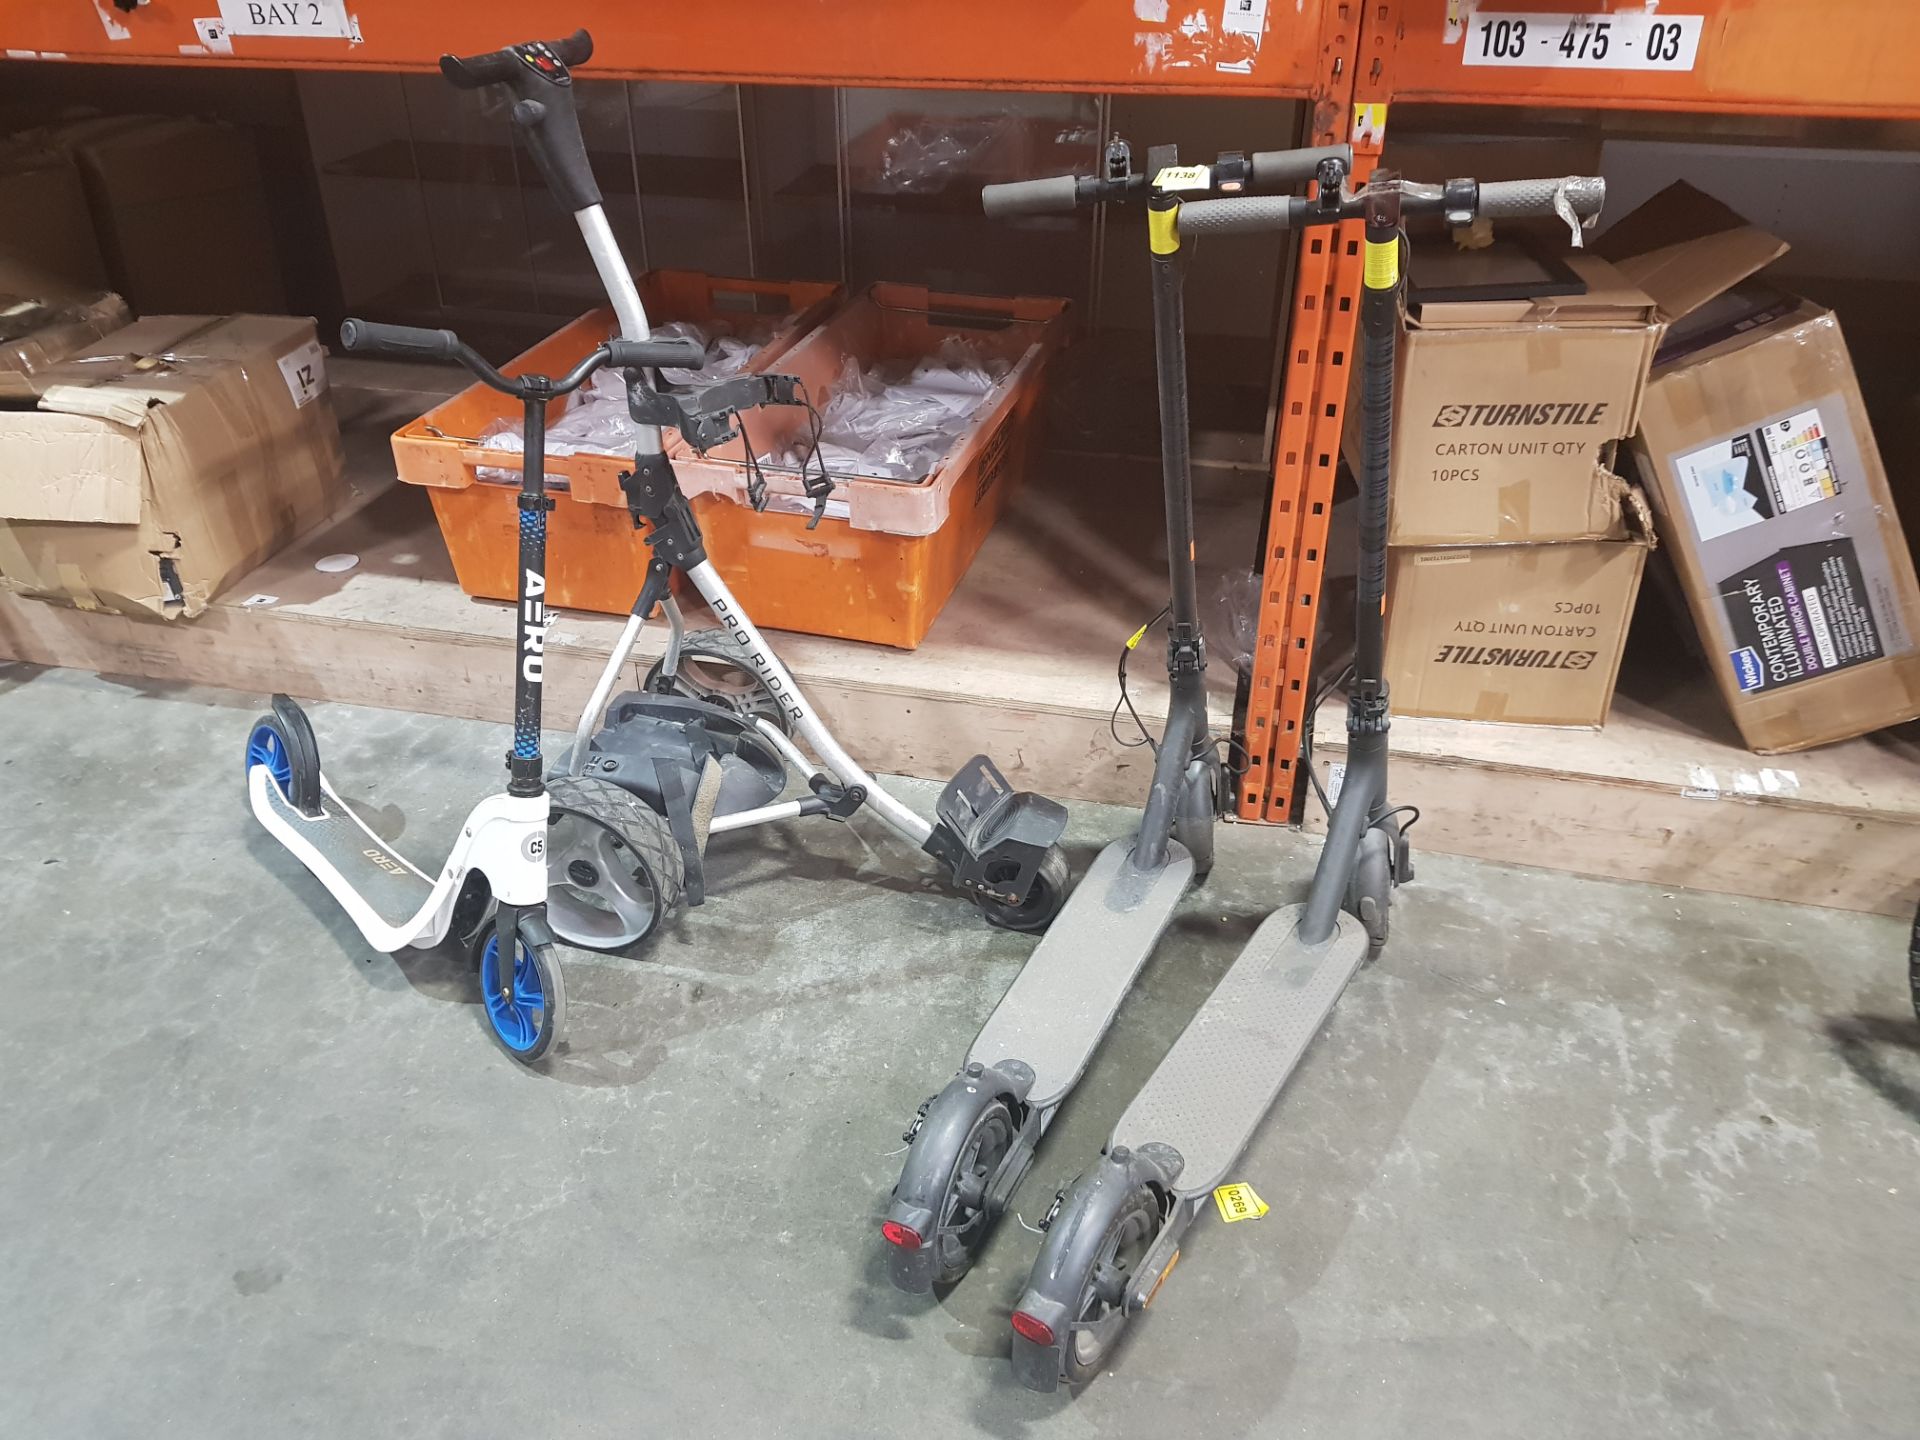 4 X MIXED LOT TO INCLUDE 2X ELECTRIC SCOOTERS - (UNTESTED) 1X AERO SCOOTER - 1X PRO RIDER GOLF